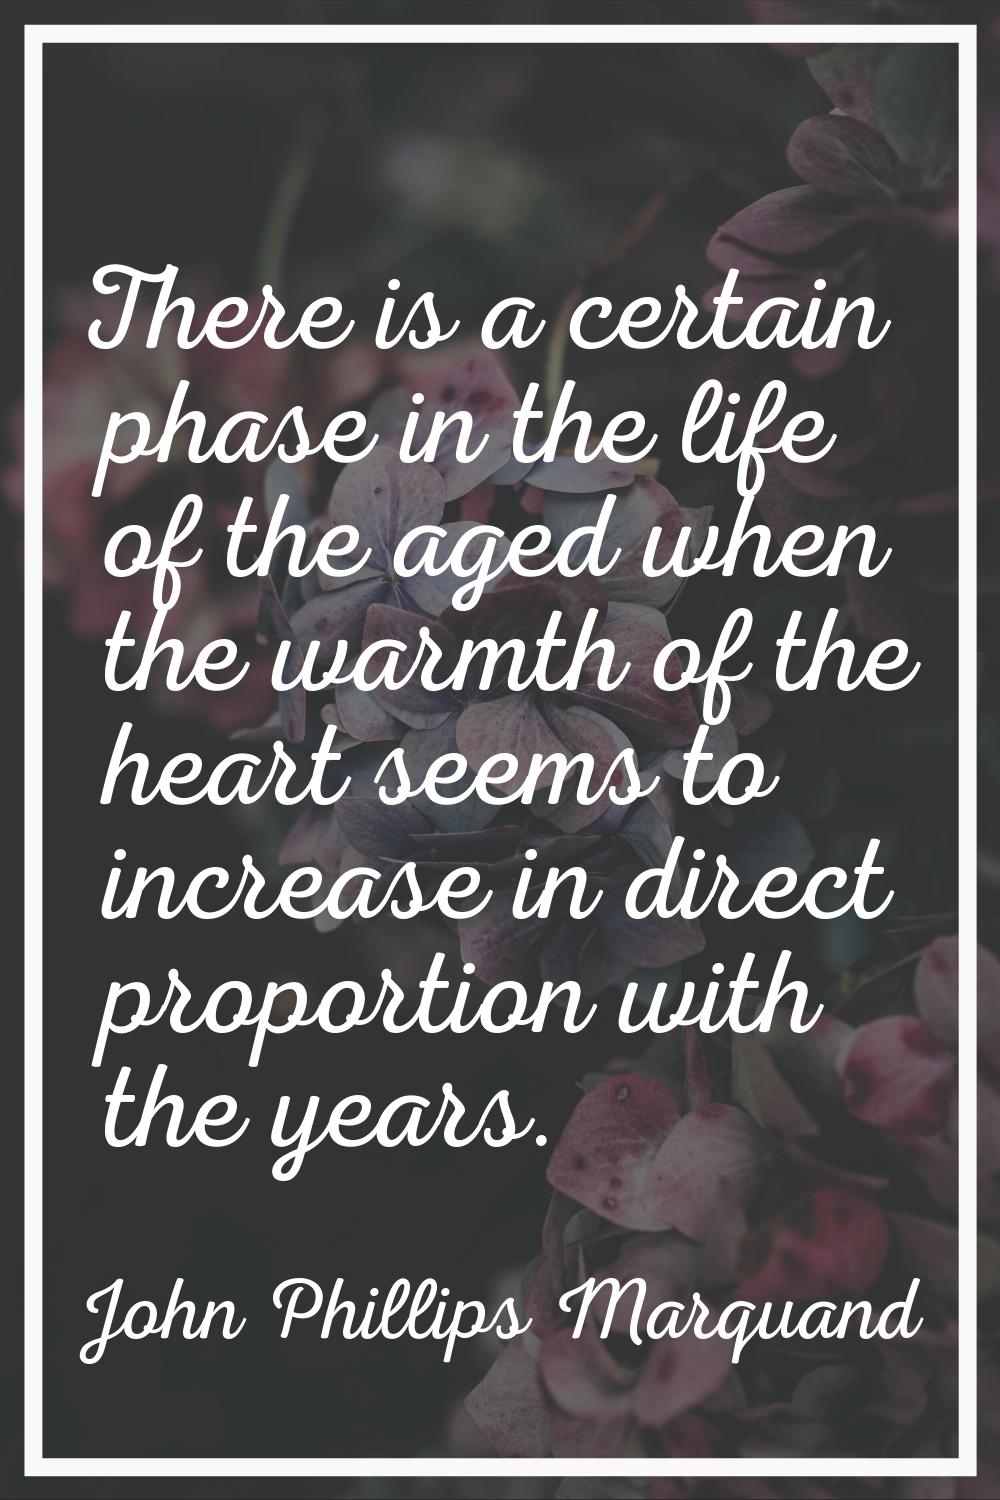 There is a certain phase in the life of the aged when the warmth of the heart seems to increase in 